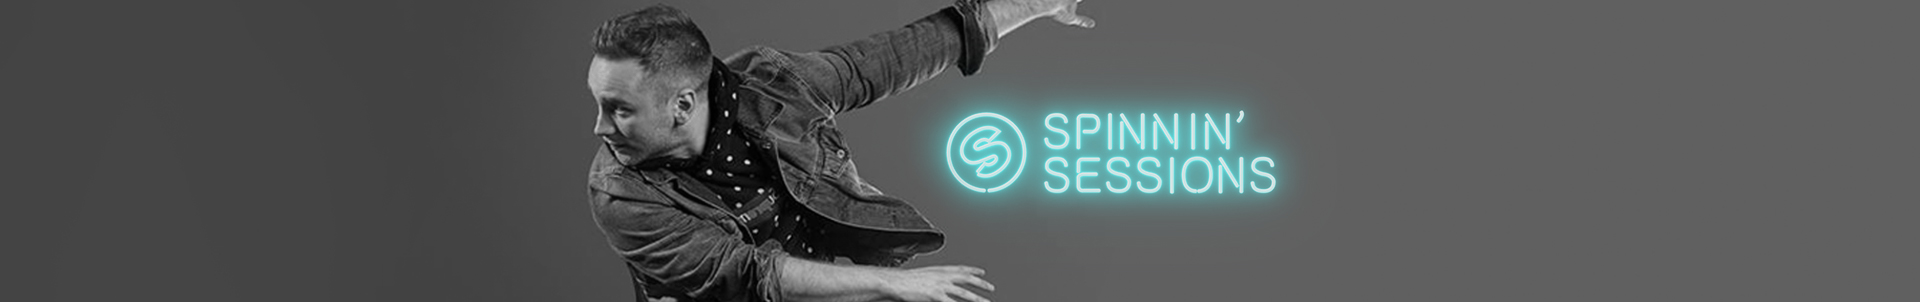 We Rave You premiere: Spinnin’ Sessions Radio Show with a guest mix by Fox Stevenson